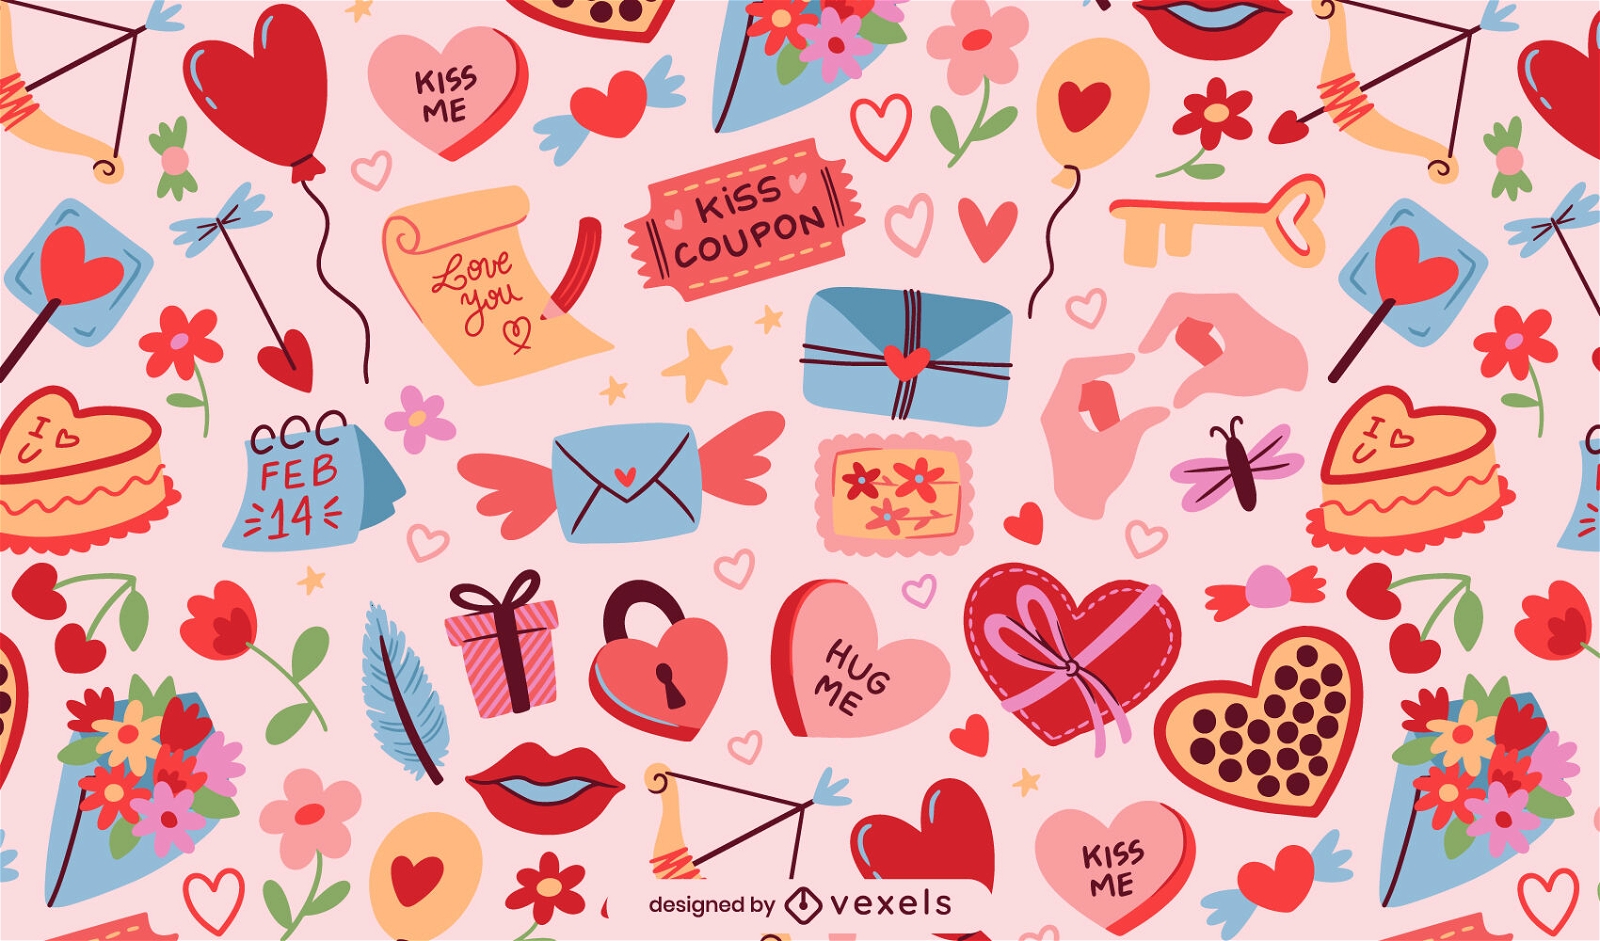 Valentines designs, themes, templates and downloadable graphic